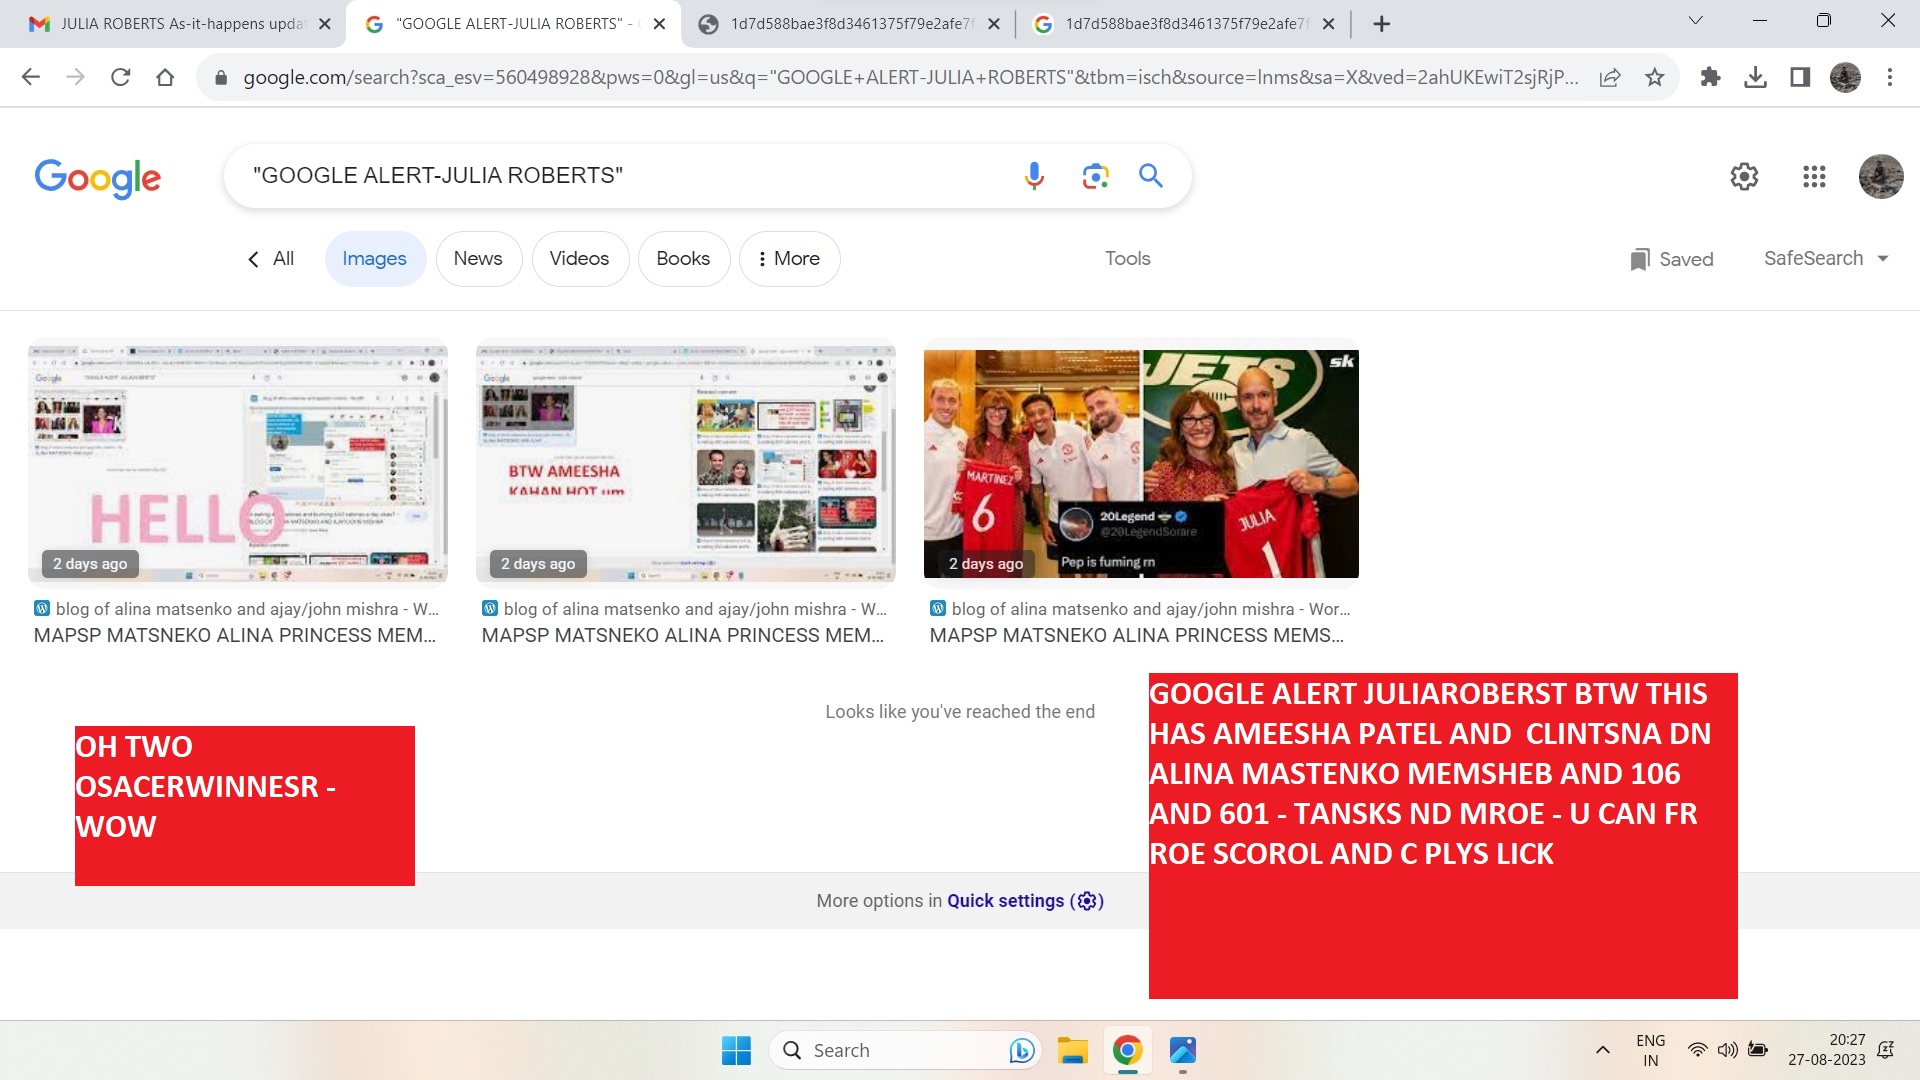 GOOGLE ALERT JULIAROBERST BTW THIS HAS AMEESHA PATEL AND CLINTSNA DN ALINA MASTENKO MEMSHEB AND 106 AND 601 - TANSKS ND MROE - U CAN FR ROE SCOROL AND C PLYS LICKOH 2 OSCARS BENKAT KRISHNATURTYY AND JUIA ROBEERST WOW 